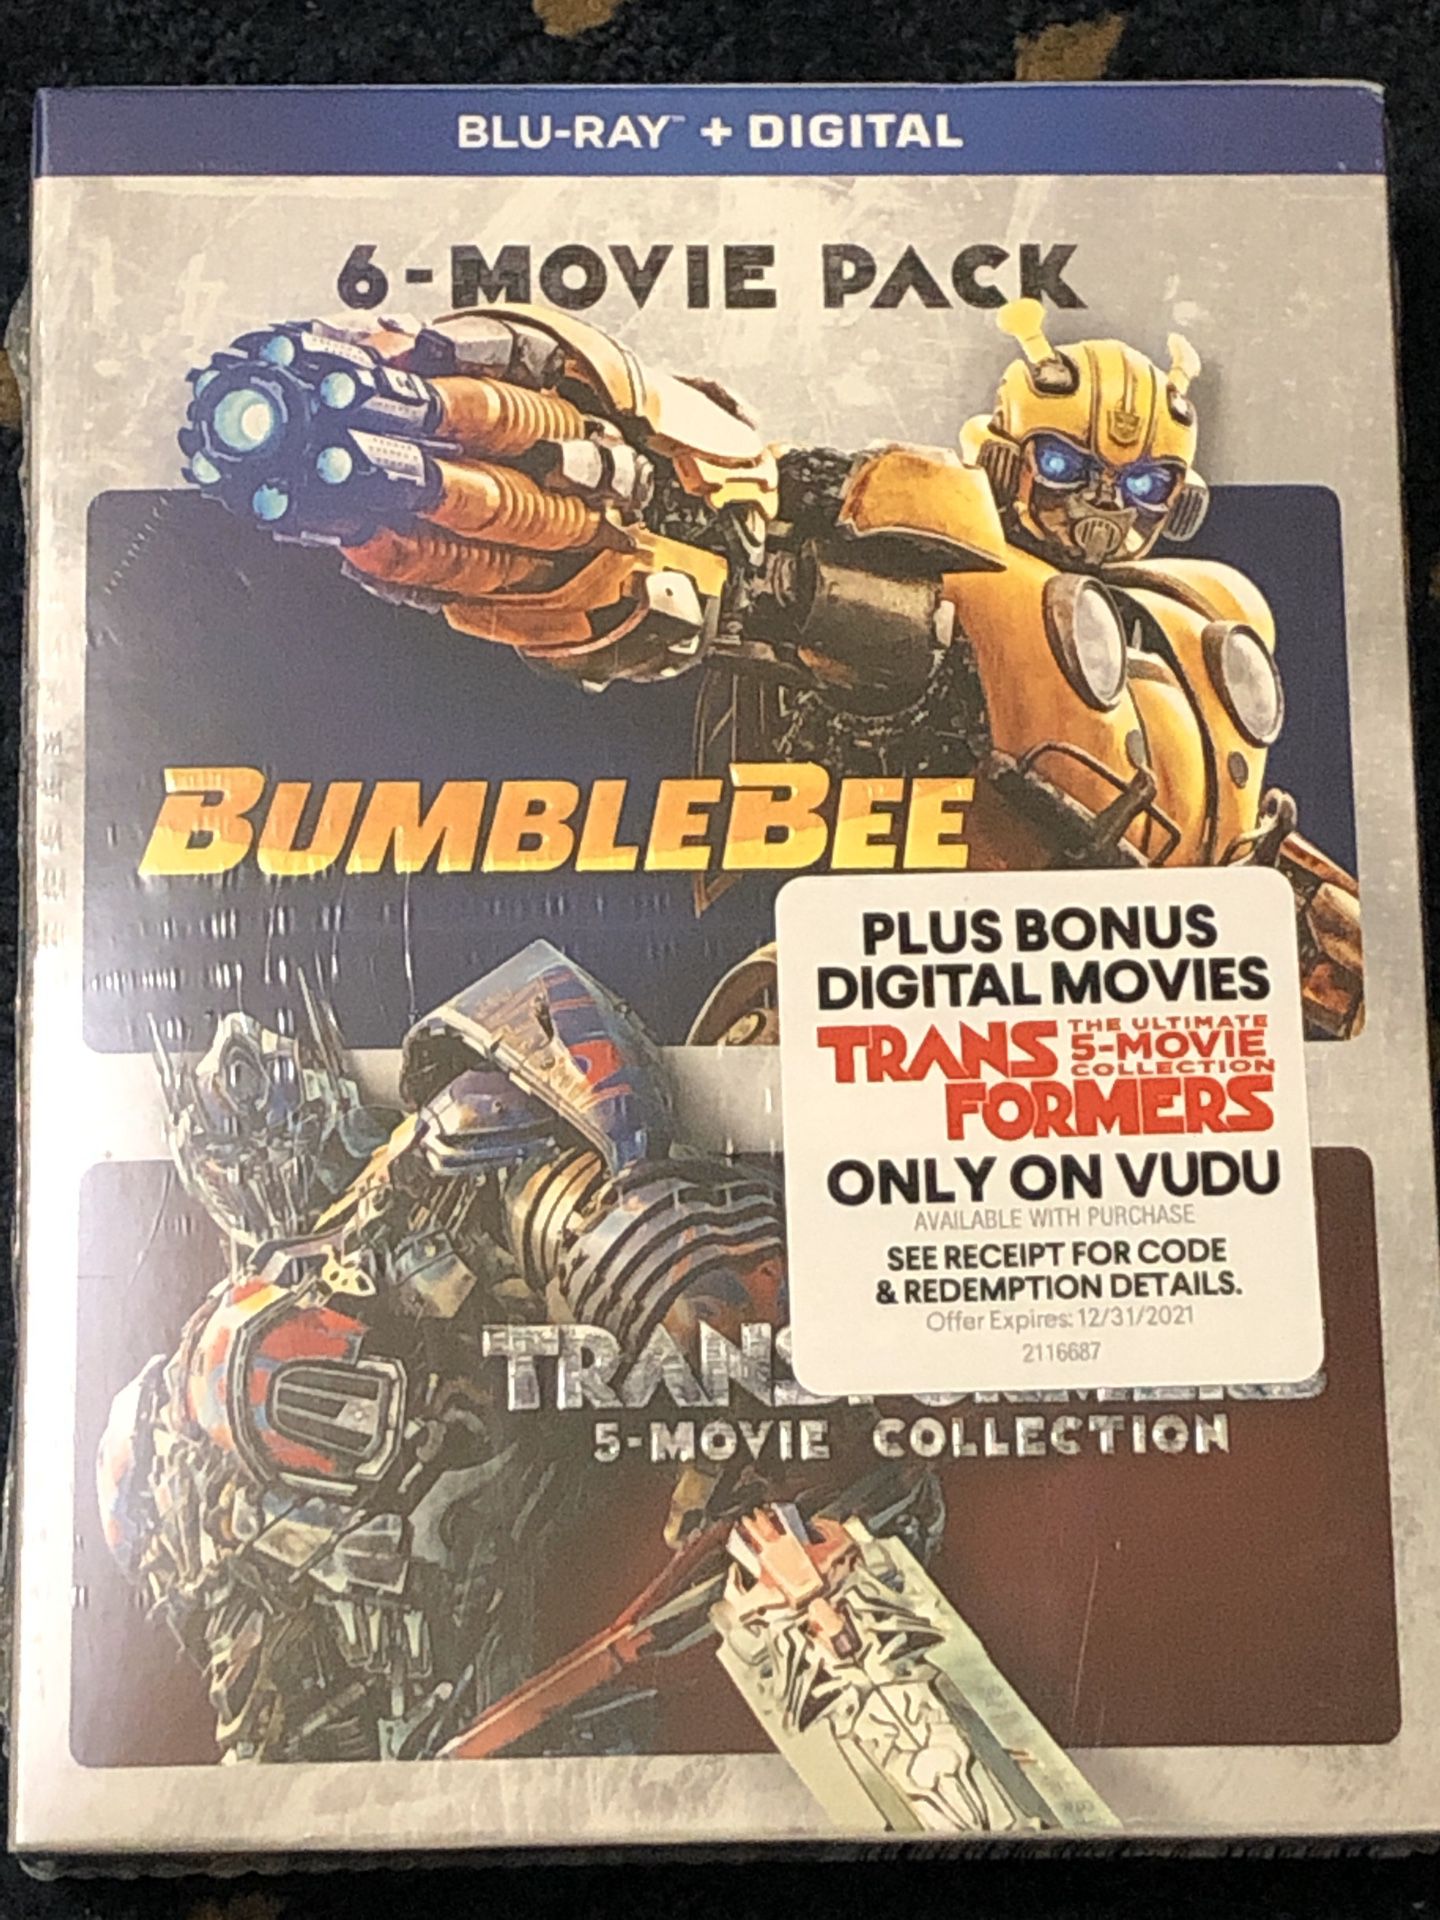 BUMBLEBEE & TRANSFORMERS (5)-MOVIE COLLECTION BLU-RAY + DIGITAL SEALED